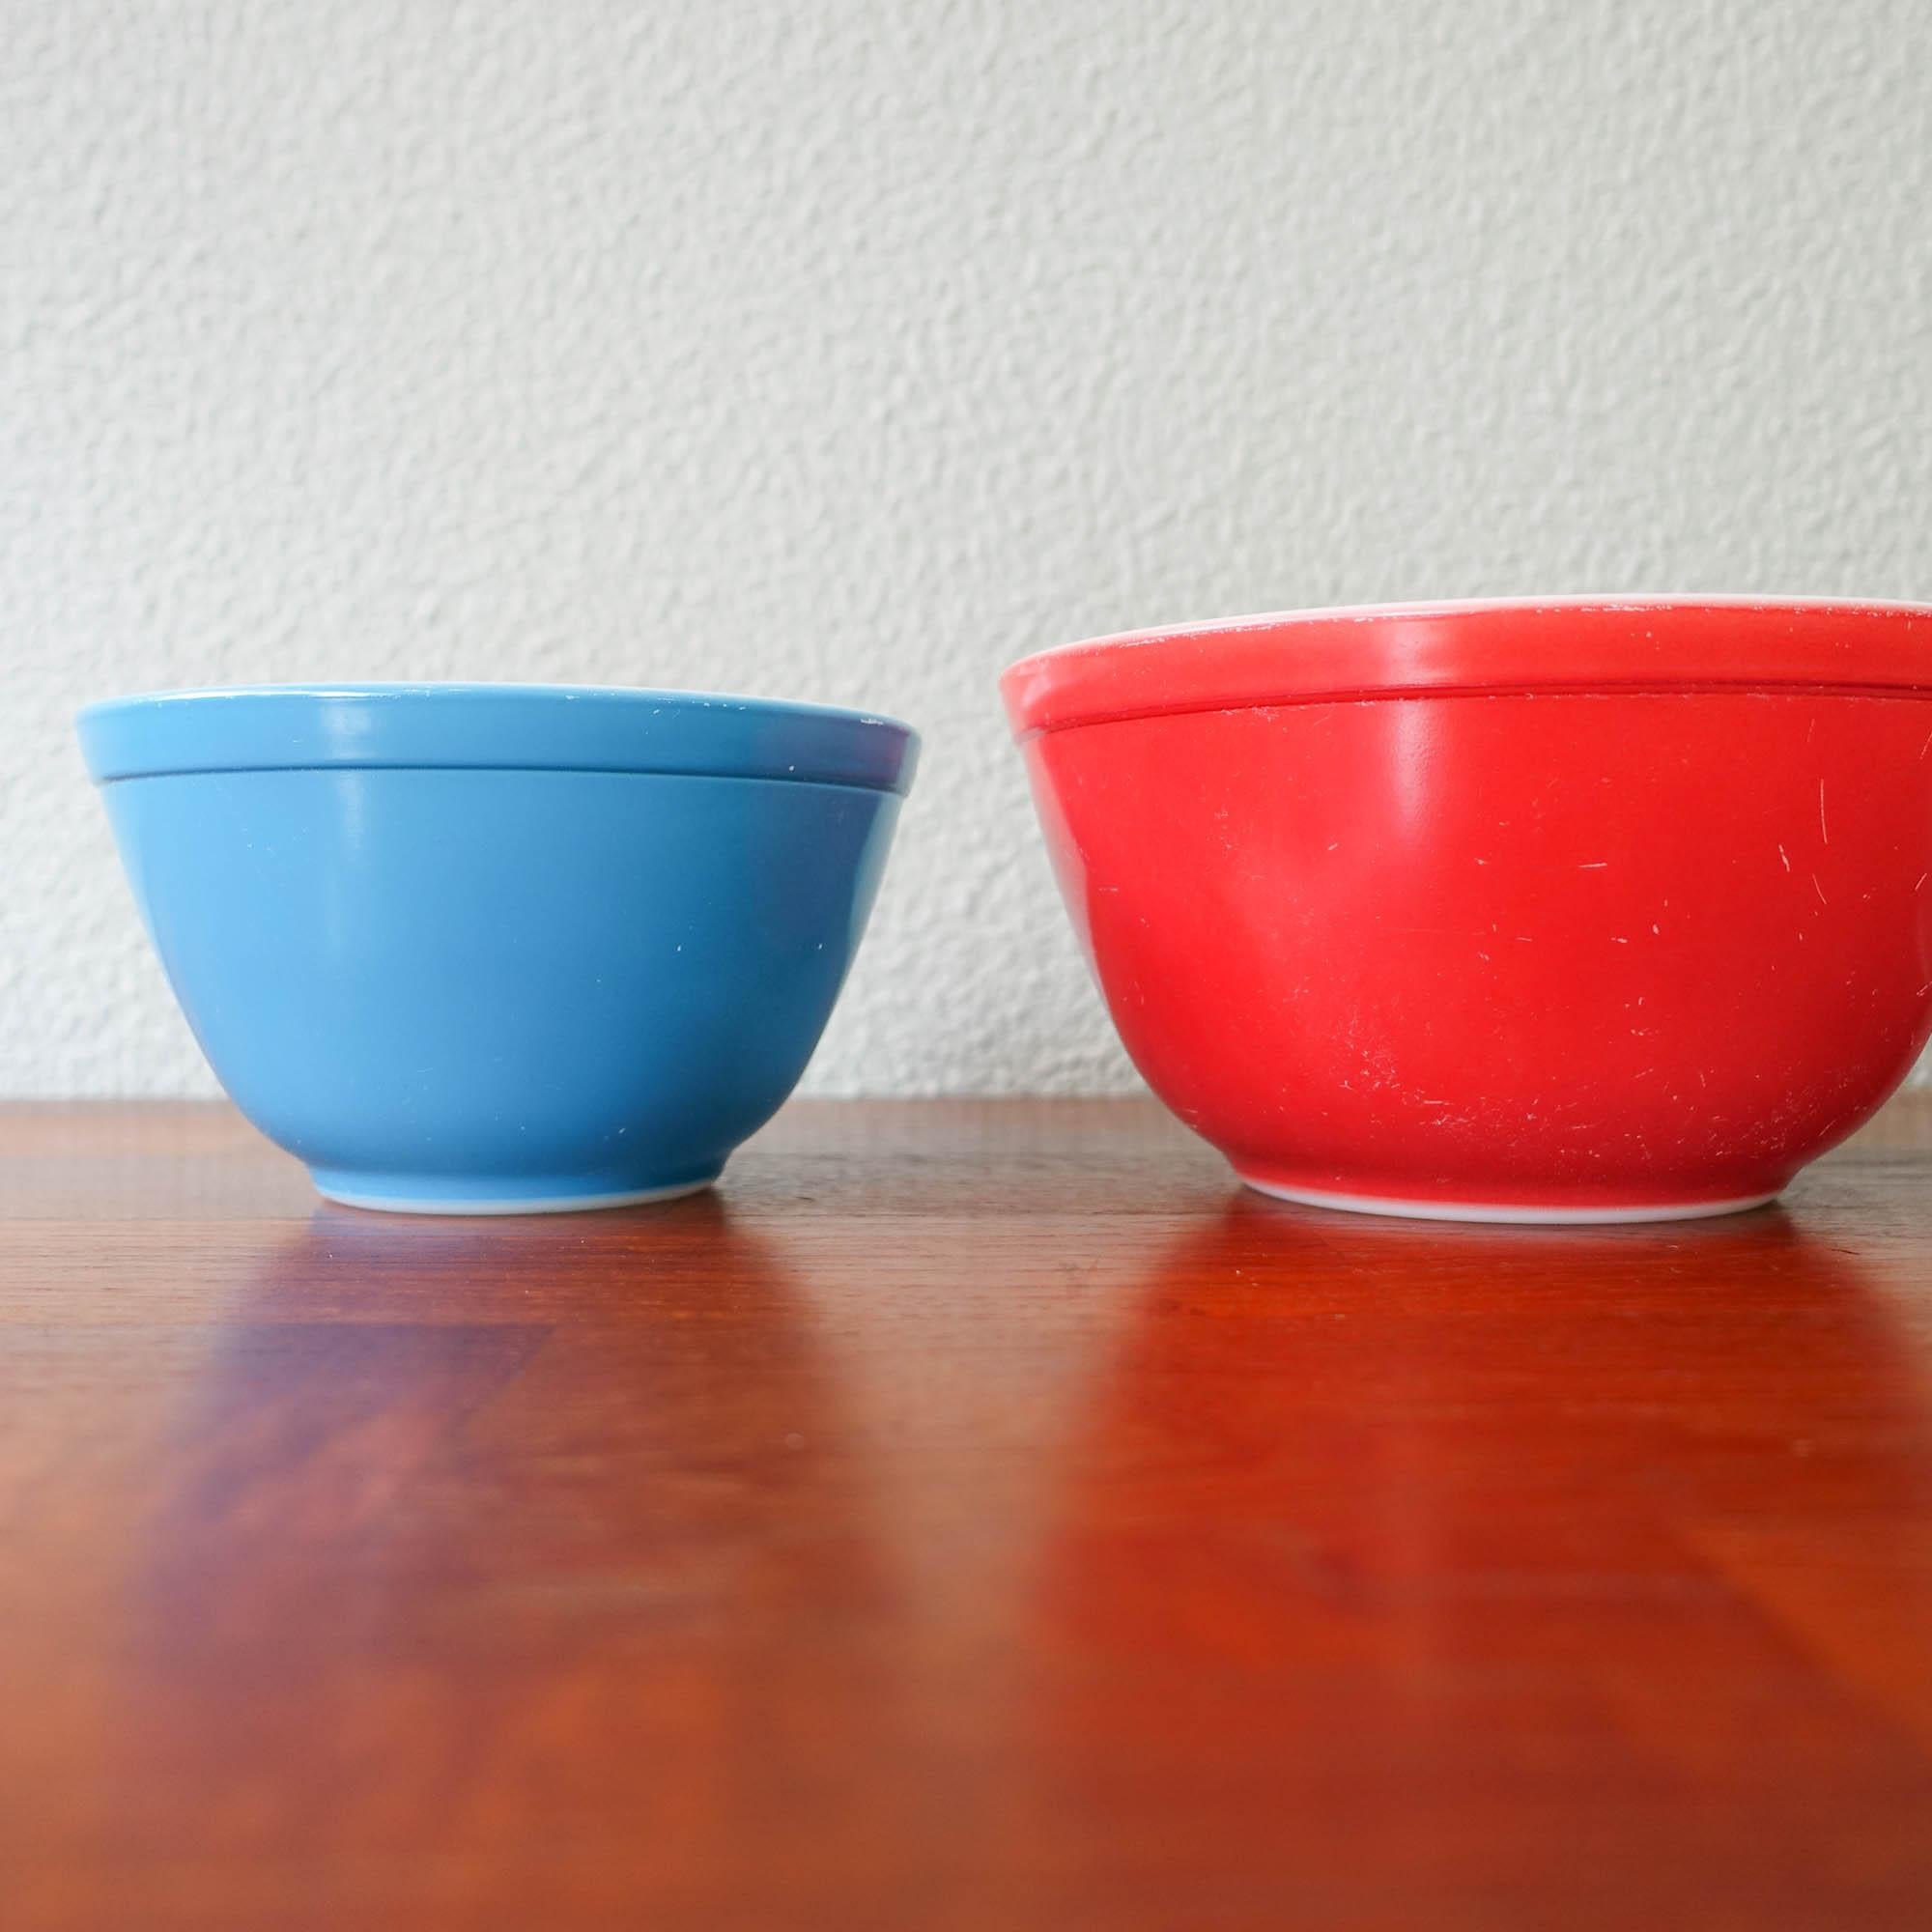 American Set of Four Vintage Pyrex Primary Color Mixing Bowls, 1950s For Sale